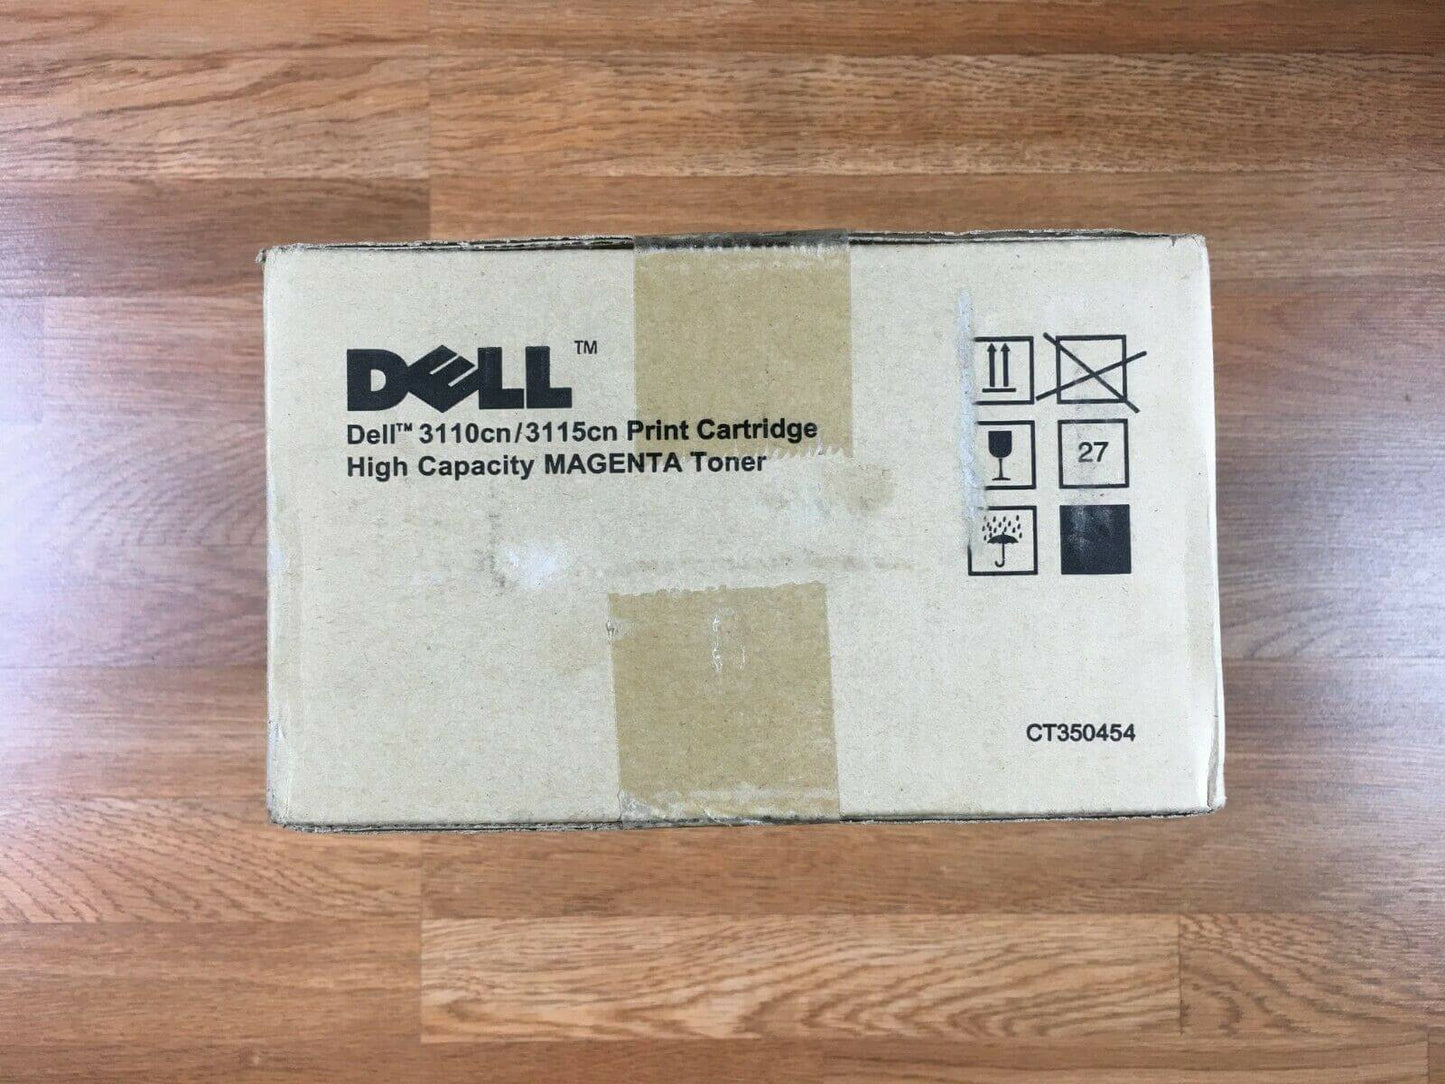 Genuine Dell Magenta High Capacity Toner For 3110cn And 3115cn FedEx 2Day Air!! - copier-clearance-center